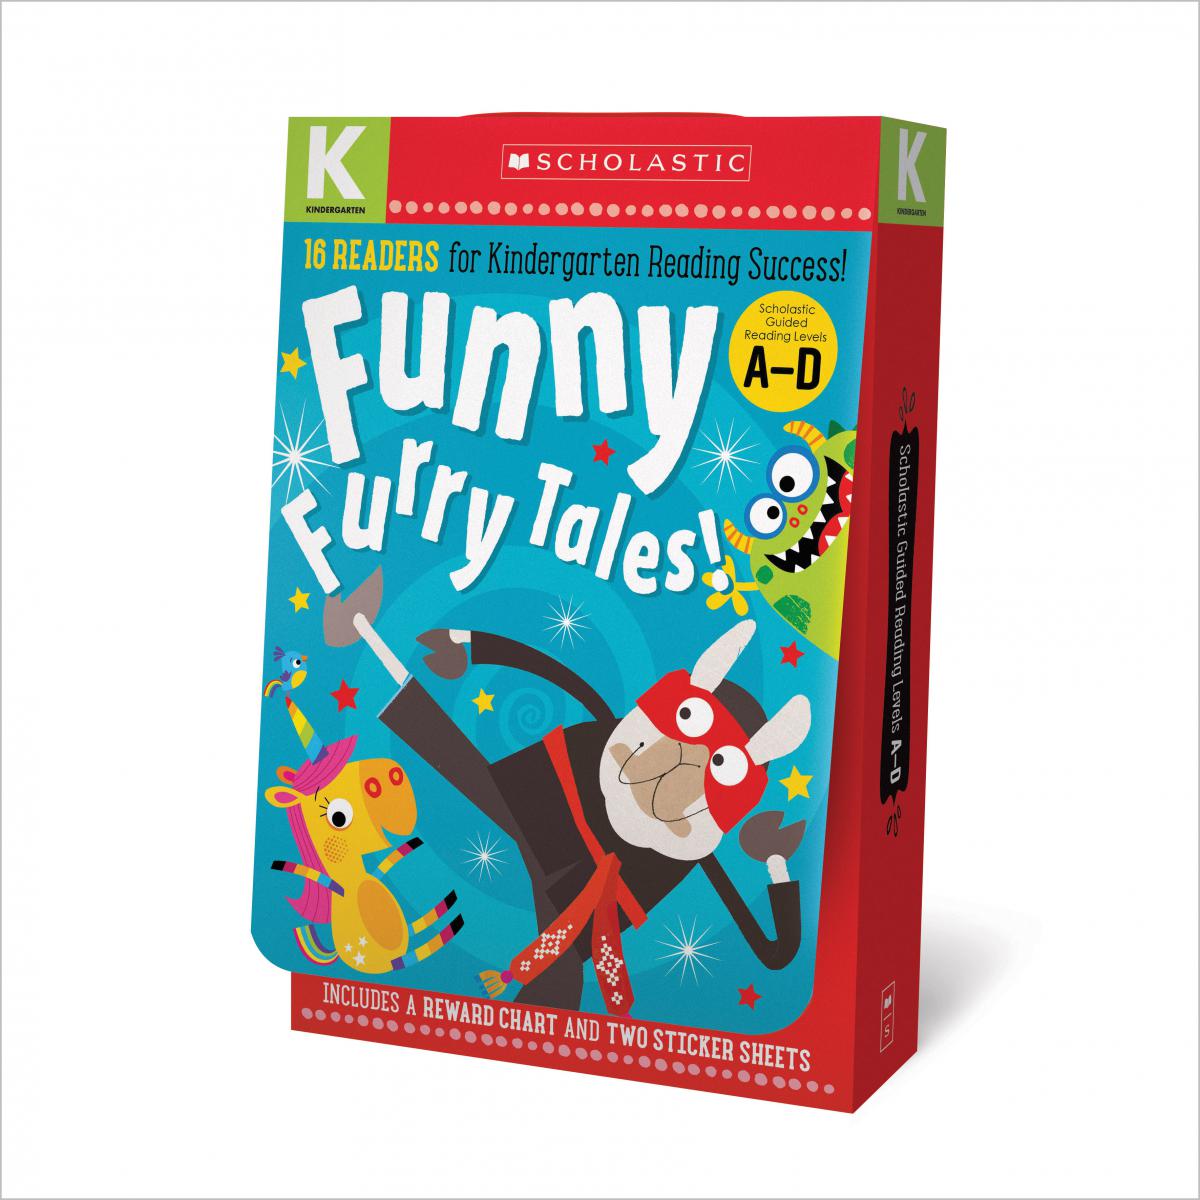 Funny Furry Tales A-D Kindergarten Reader Box Set: Scholastic Early Learners (Guided Reader) | First reader